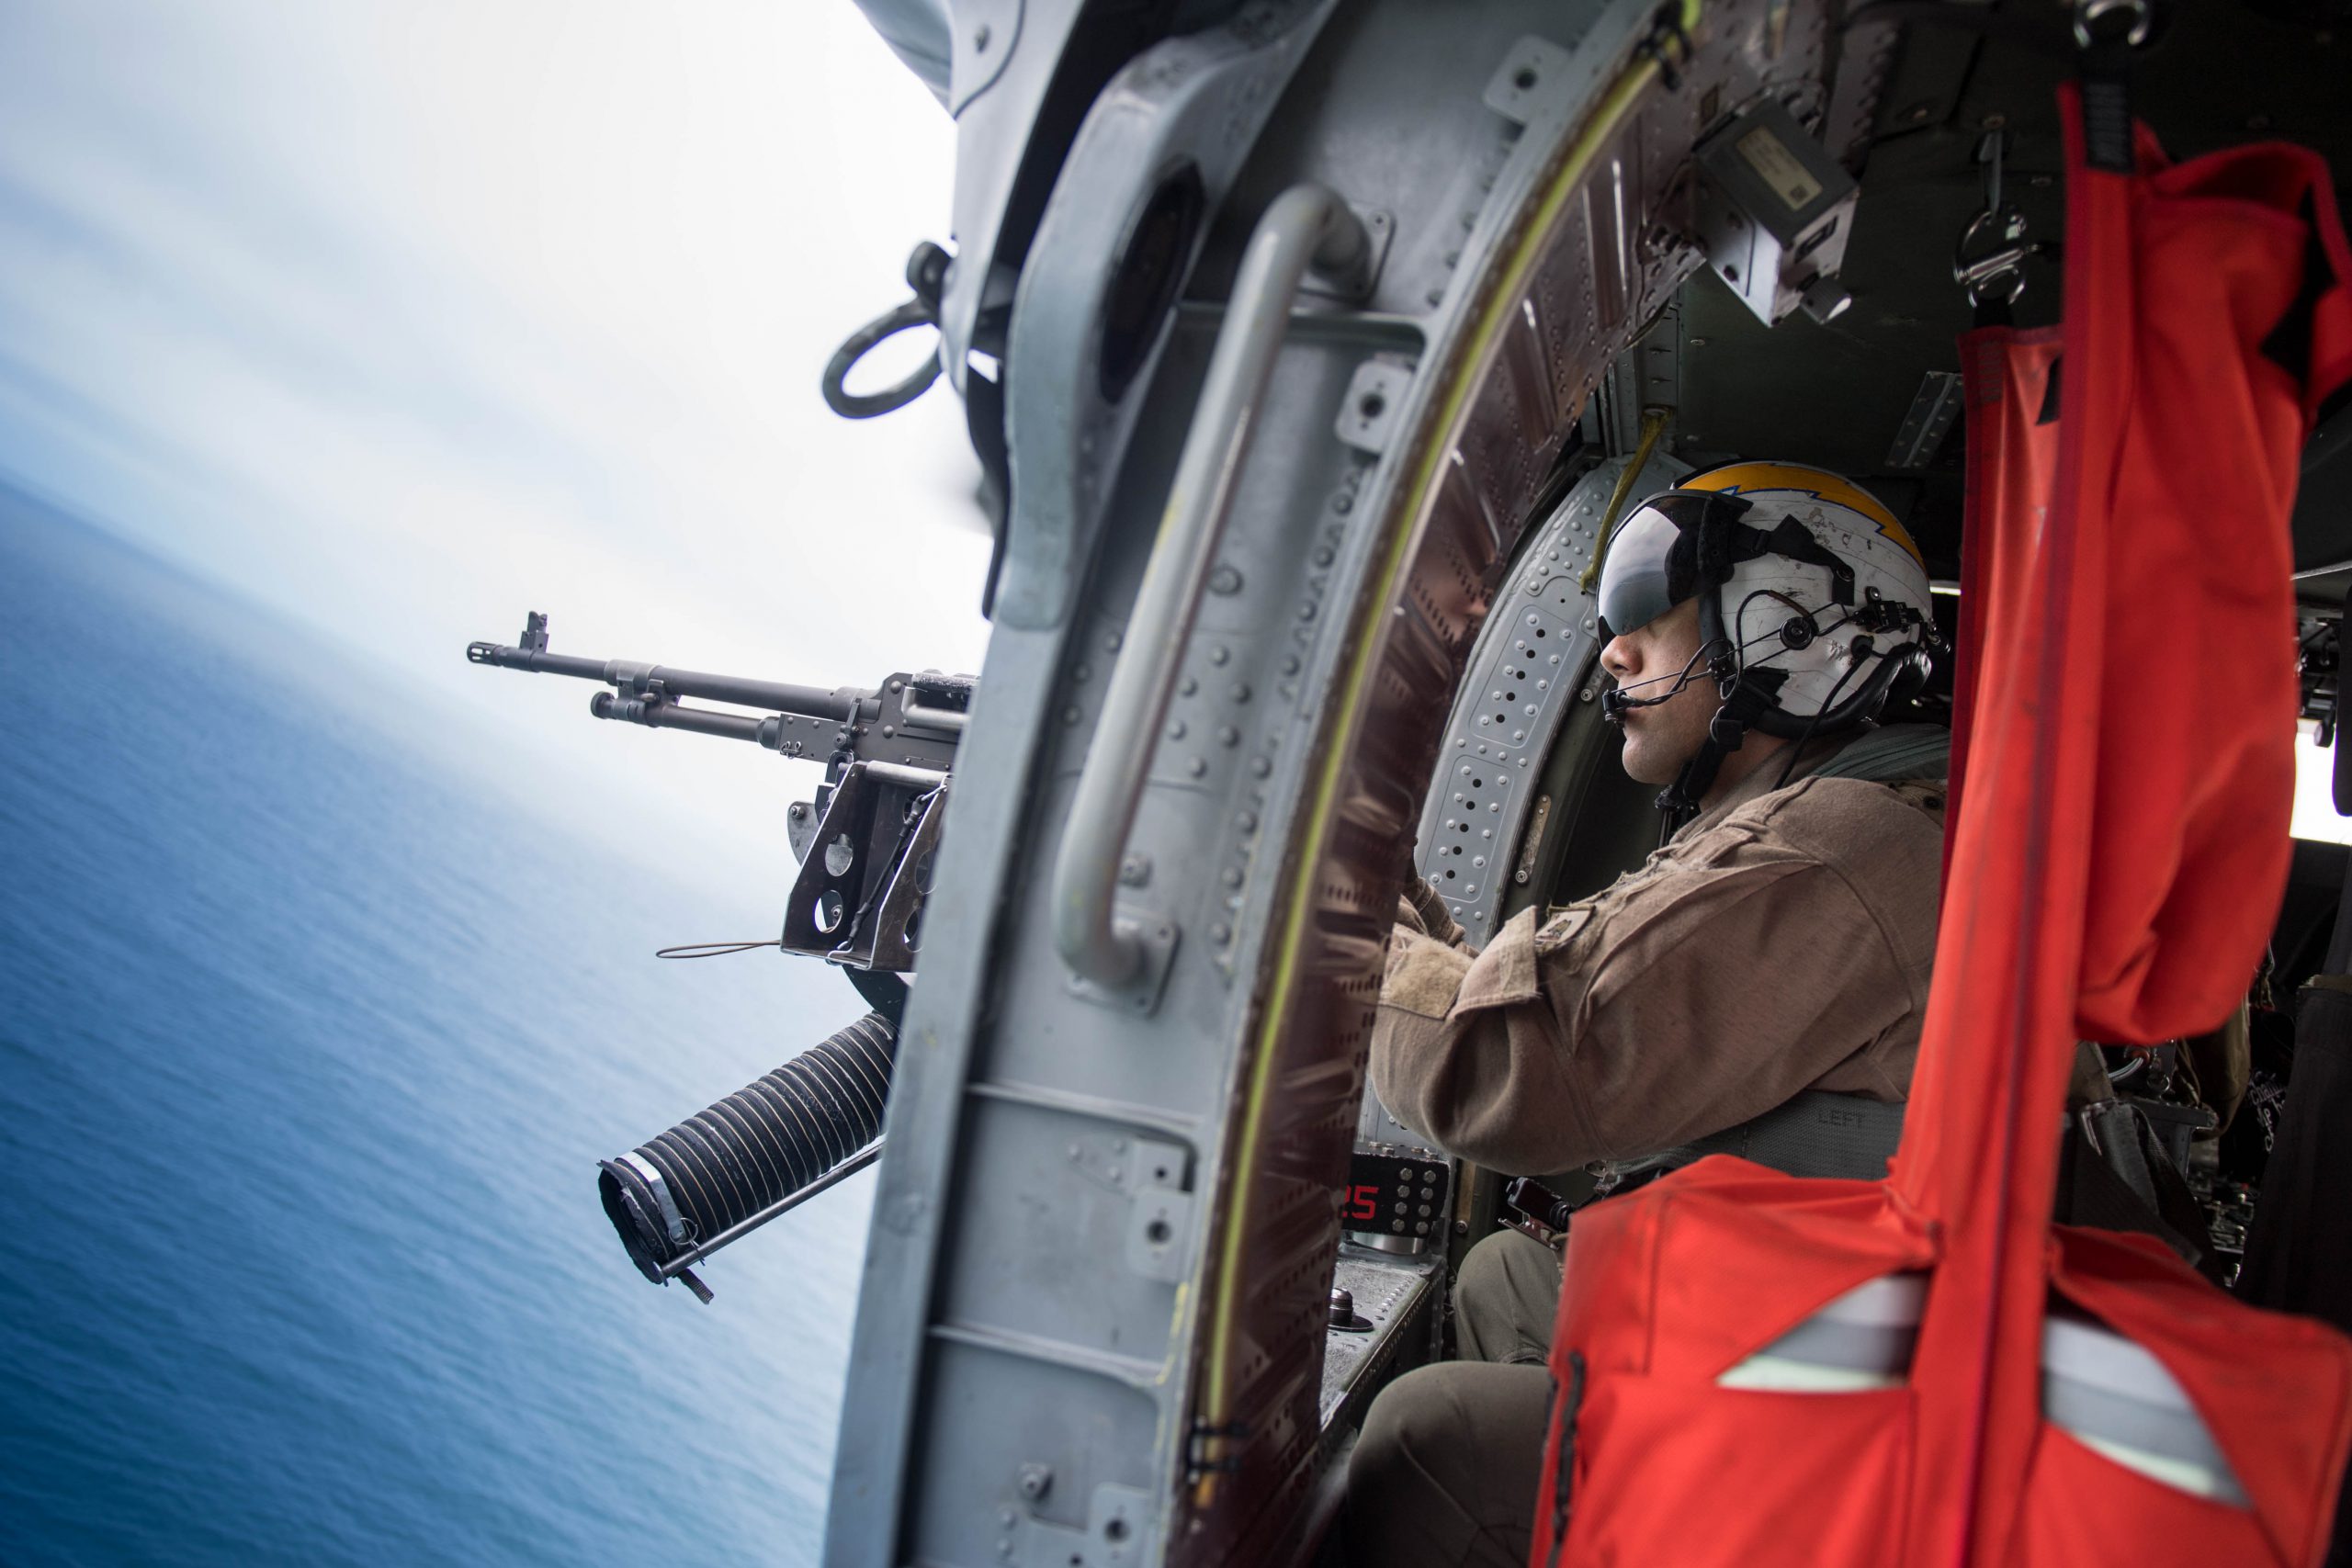 PACIFIC OCEAN (May 7, 2018) Naval Air Crewman (Helicopter) 2nd Class Juan Morabarajas, from Oakland, Calif., mans a .50-caliber machine gun inside an MH-60S Sea Hawk helicopter assigned to the Chargers of Helicopter Sea Combat Squadron (HSC) 14. The aircraft carrier USS John C. Stennis (CVN 74) is underway with the ships and squadrons of Carrier Strike Group (CSG) 3 conducting group sail training in preparation for its next scheduled deployment. U.S. Navy photo by Mass Communication Specialist 3rd Class Cole C. Pielop. -